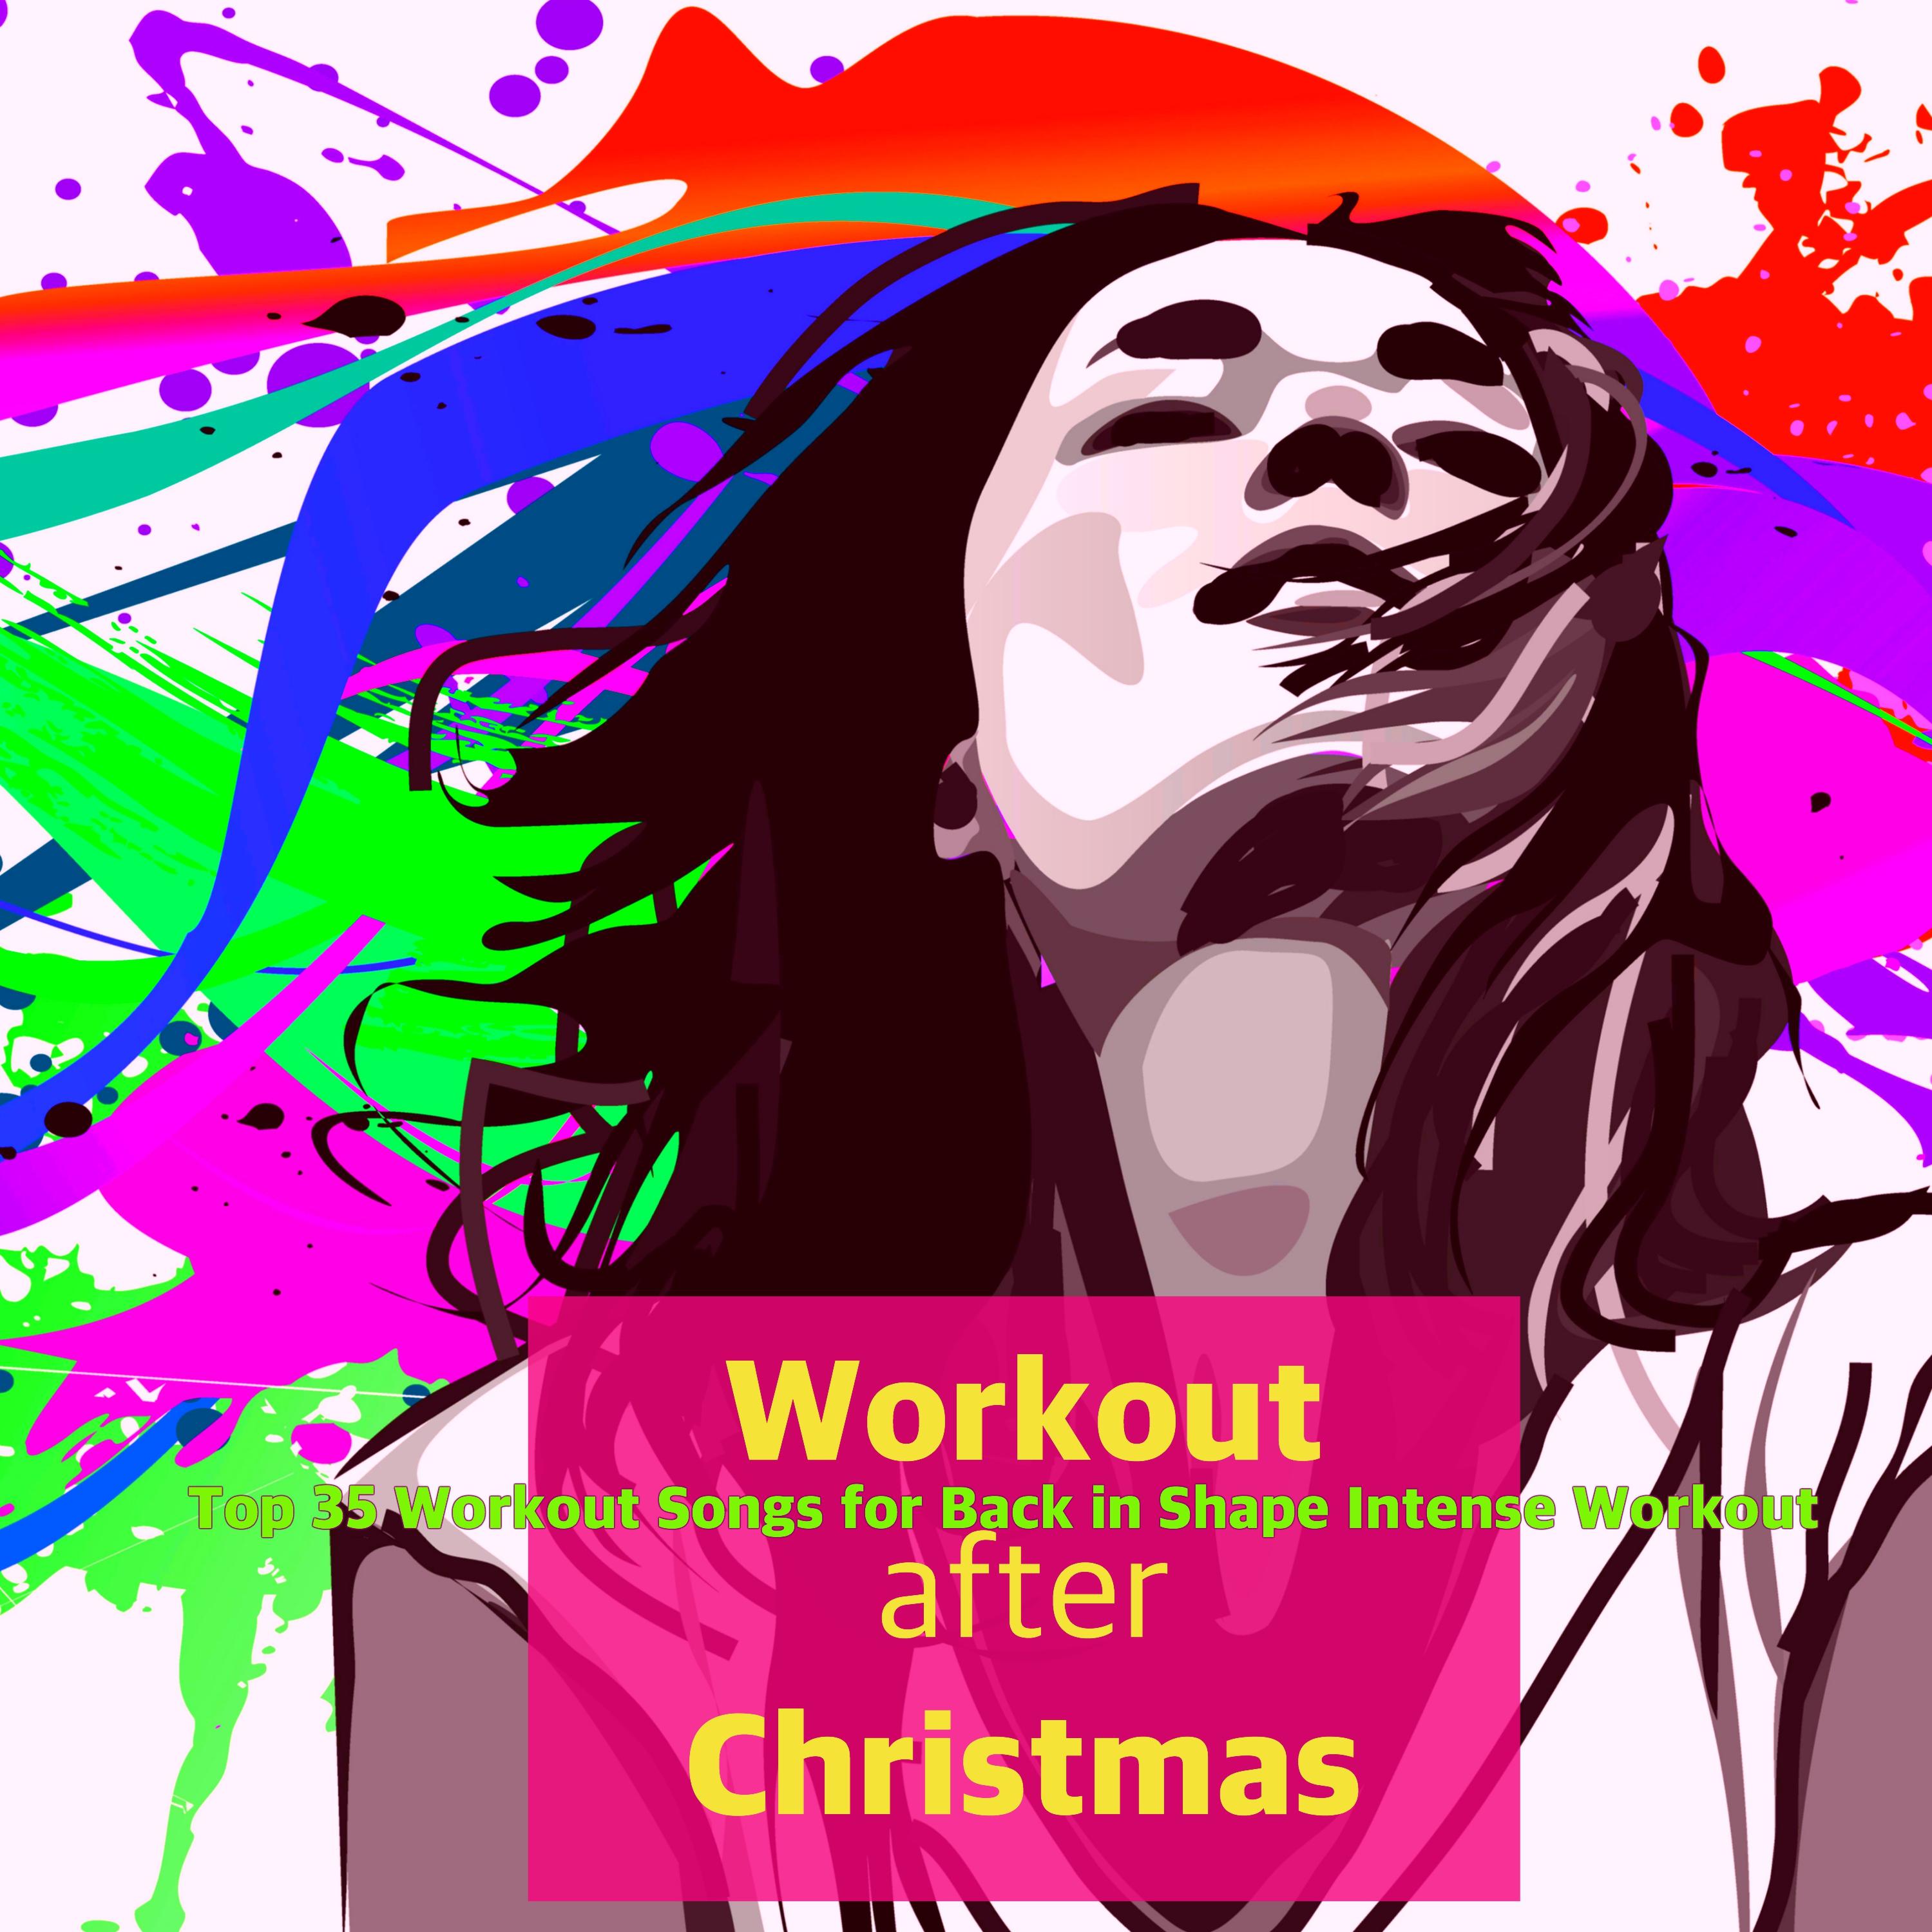 Workout after Christmas